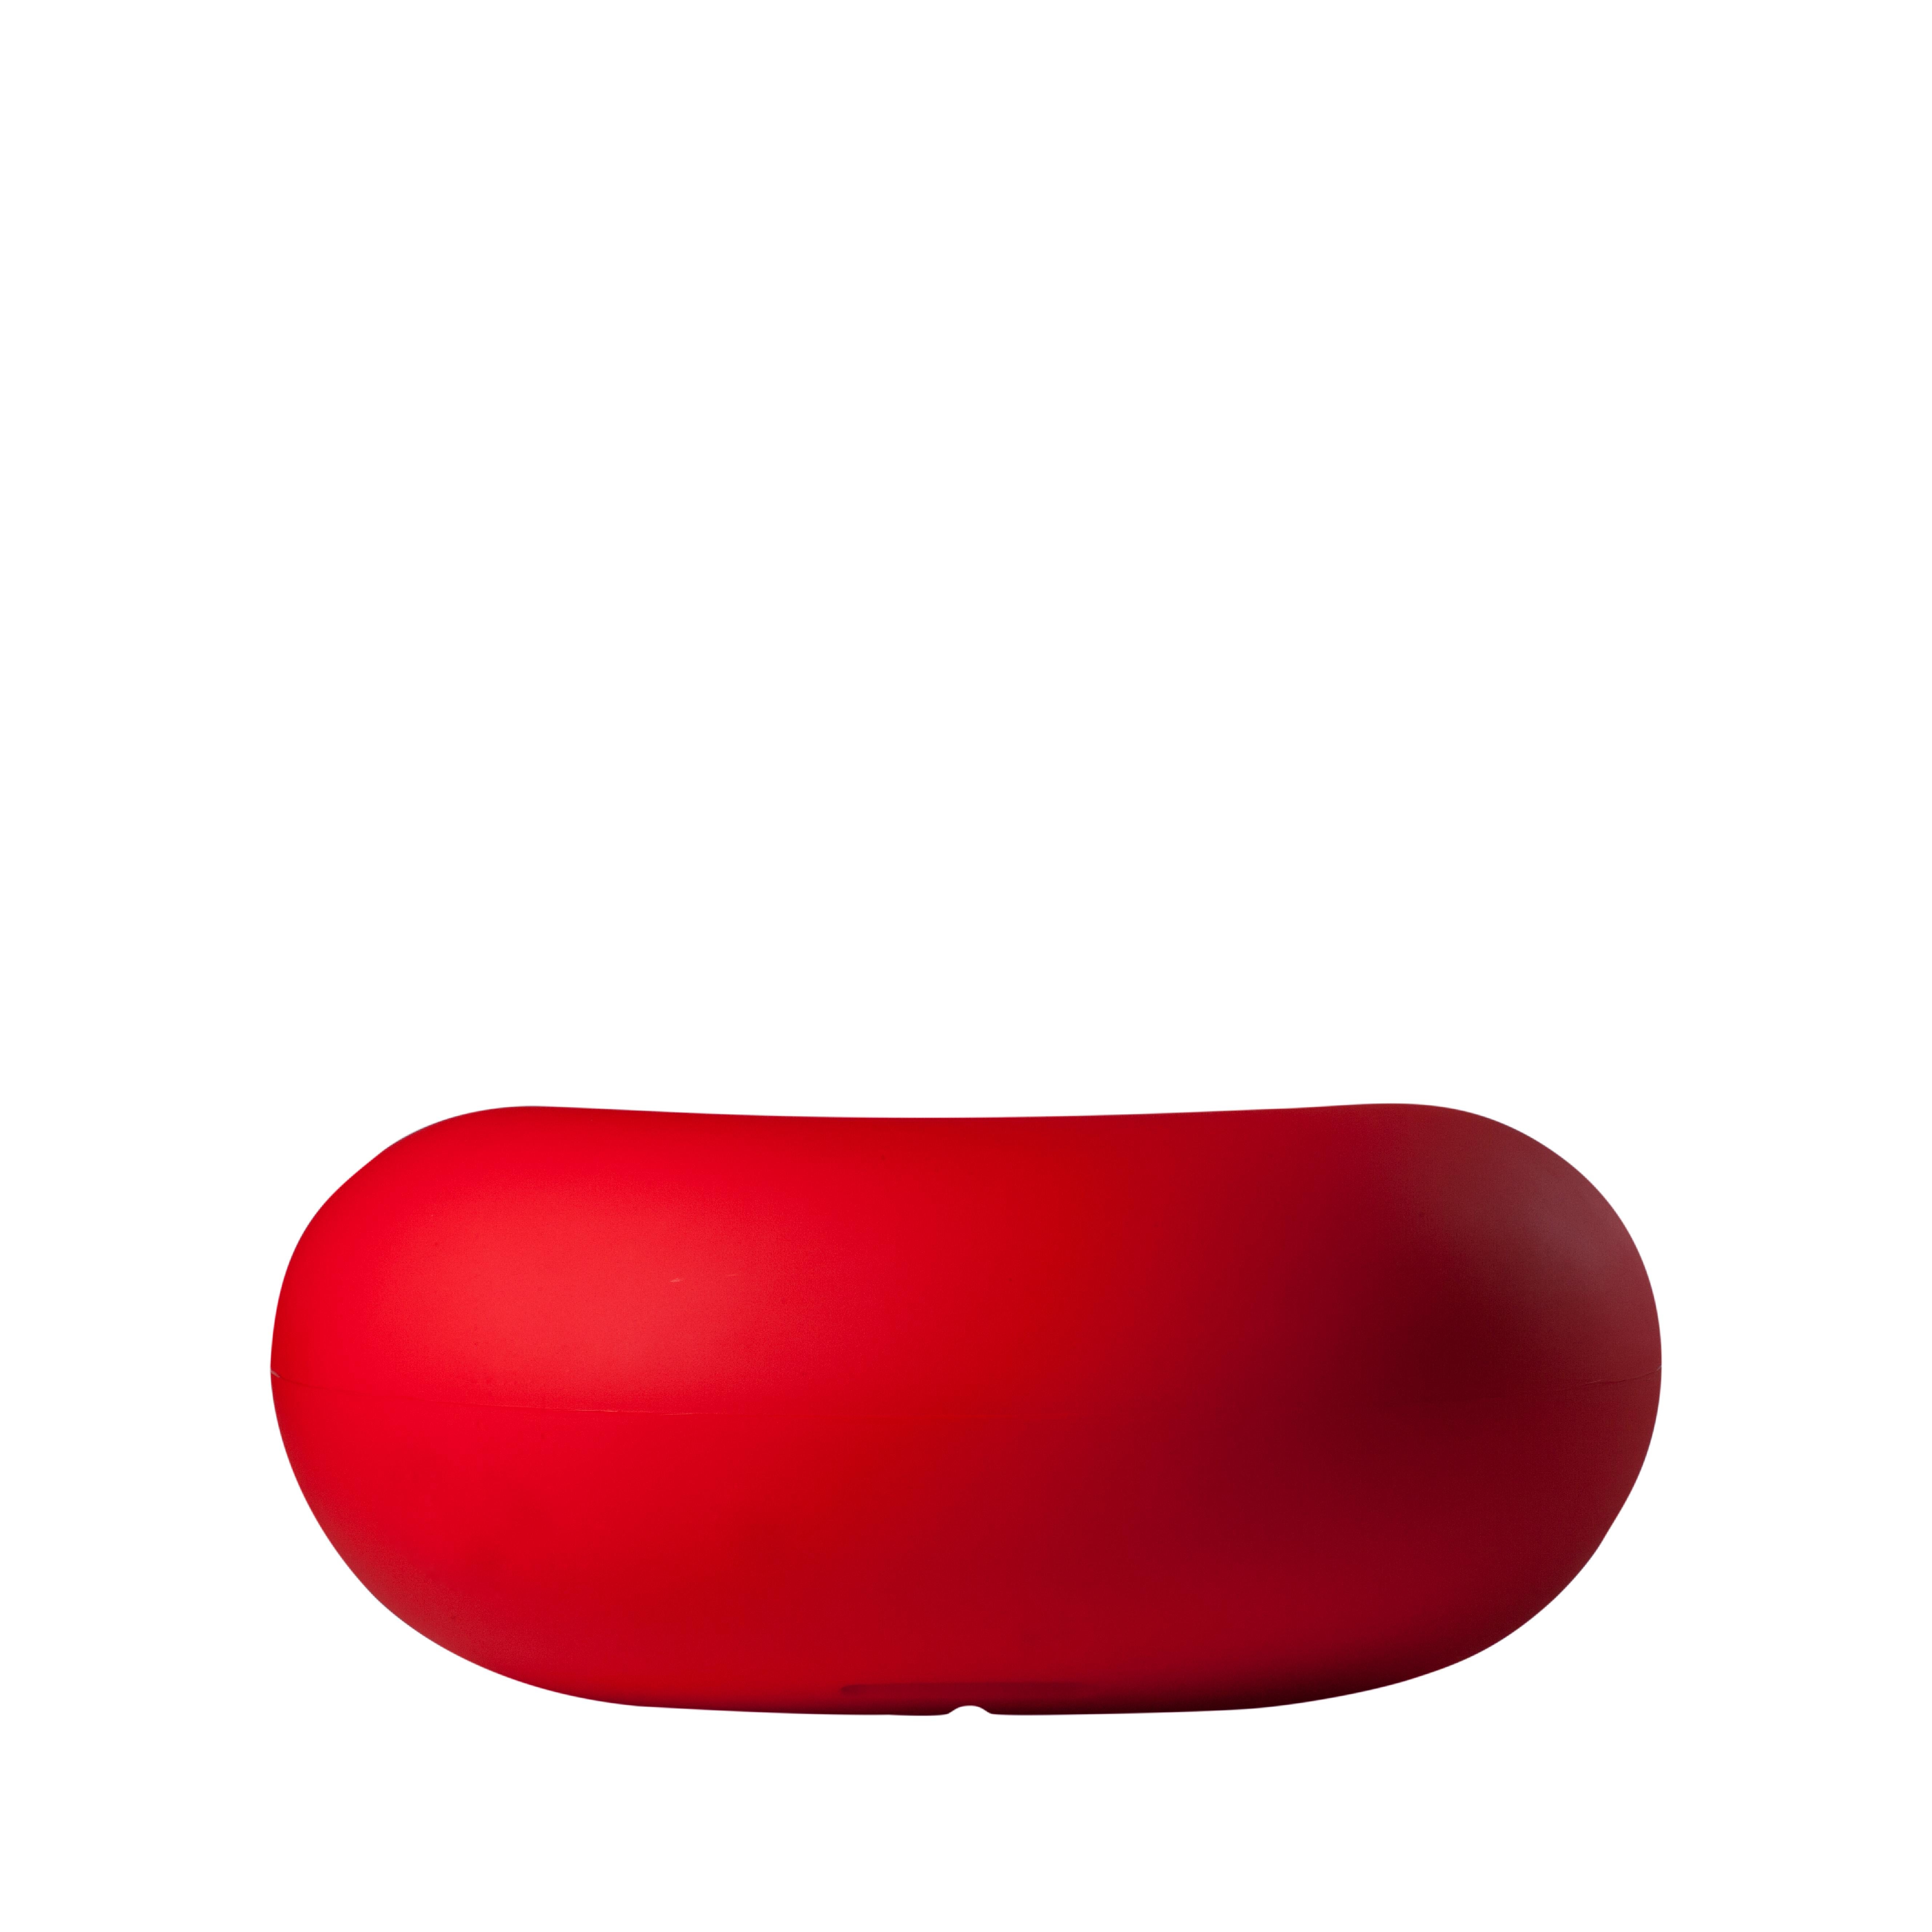 Slide Design Chubby Lounge Armchair in Flame Red by Marcel Wanders In New Condition For Sale In Brooklyn, NY